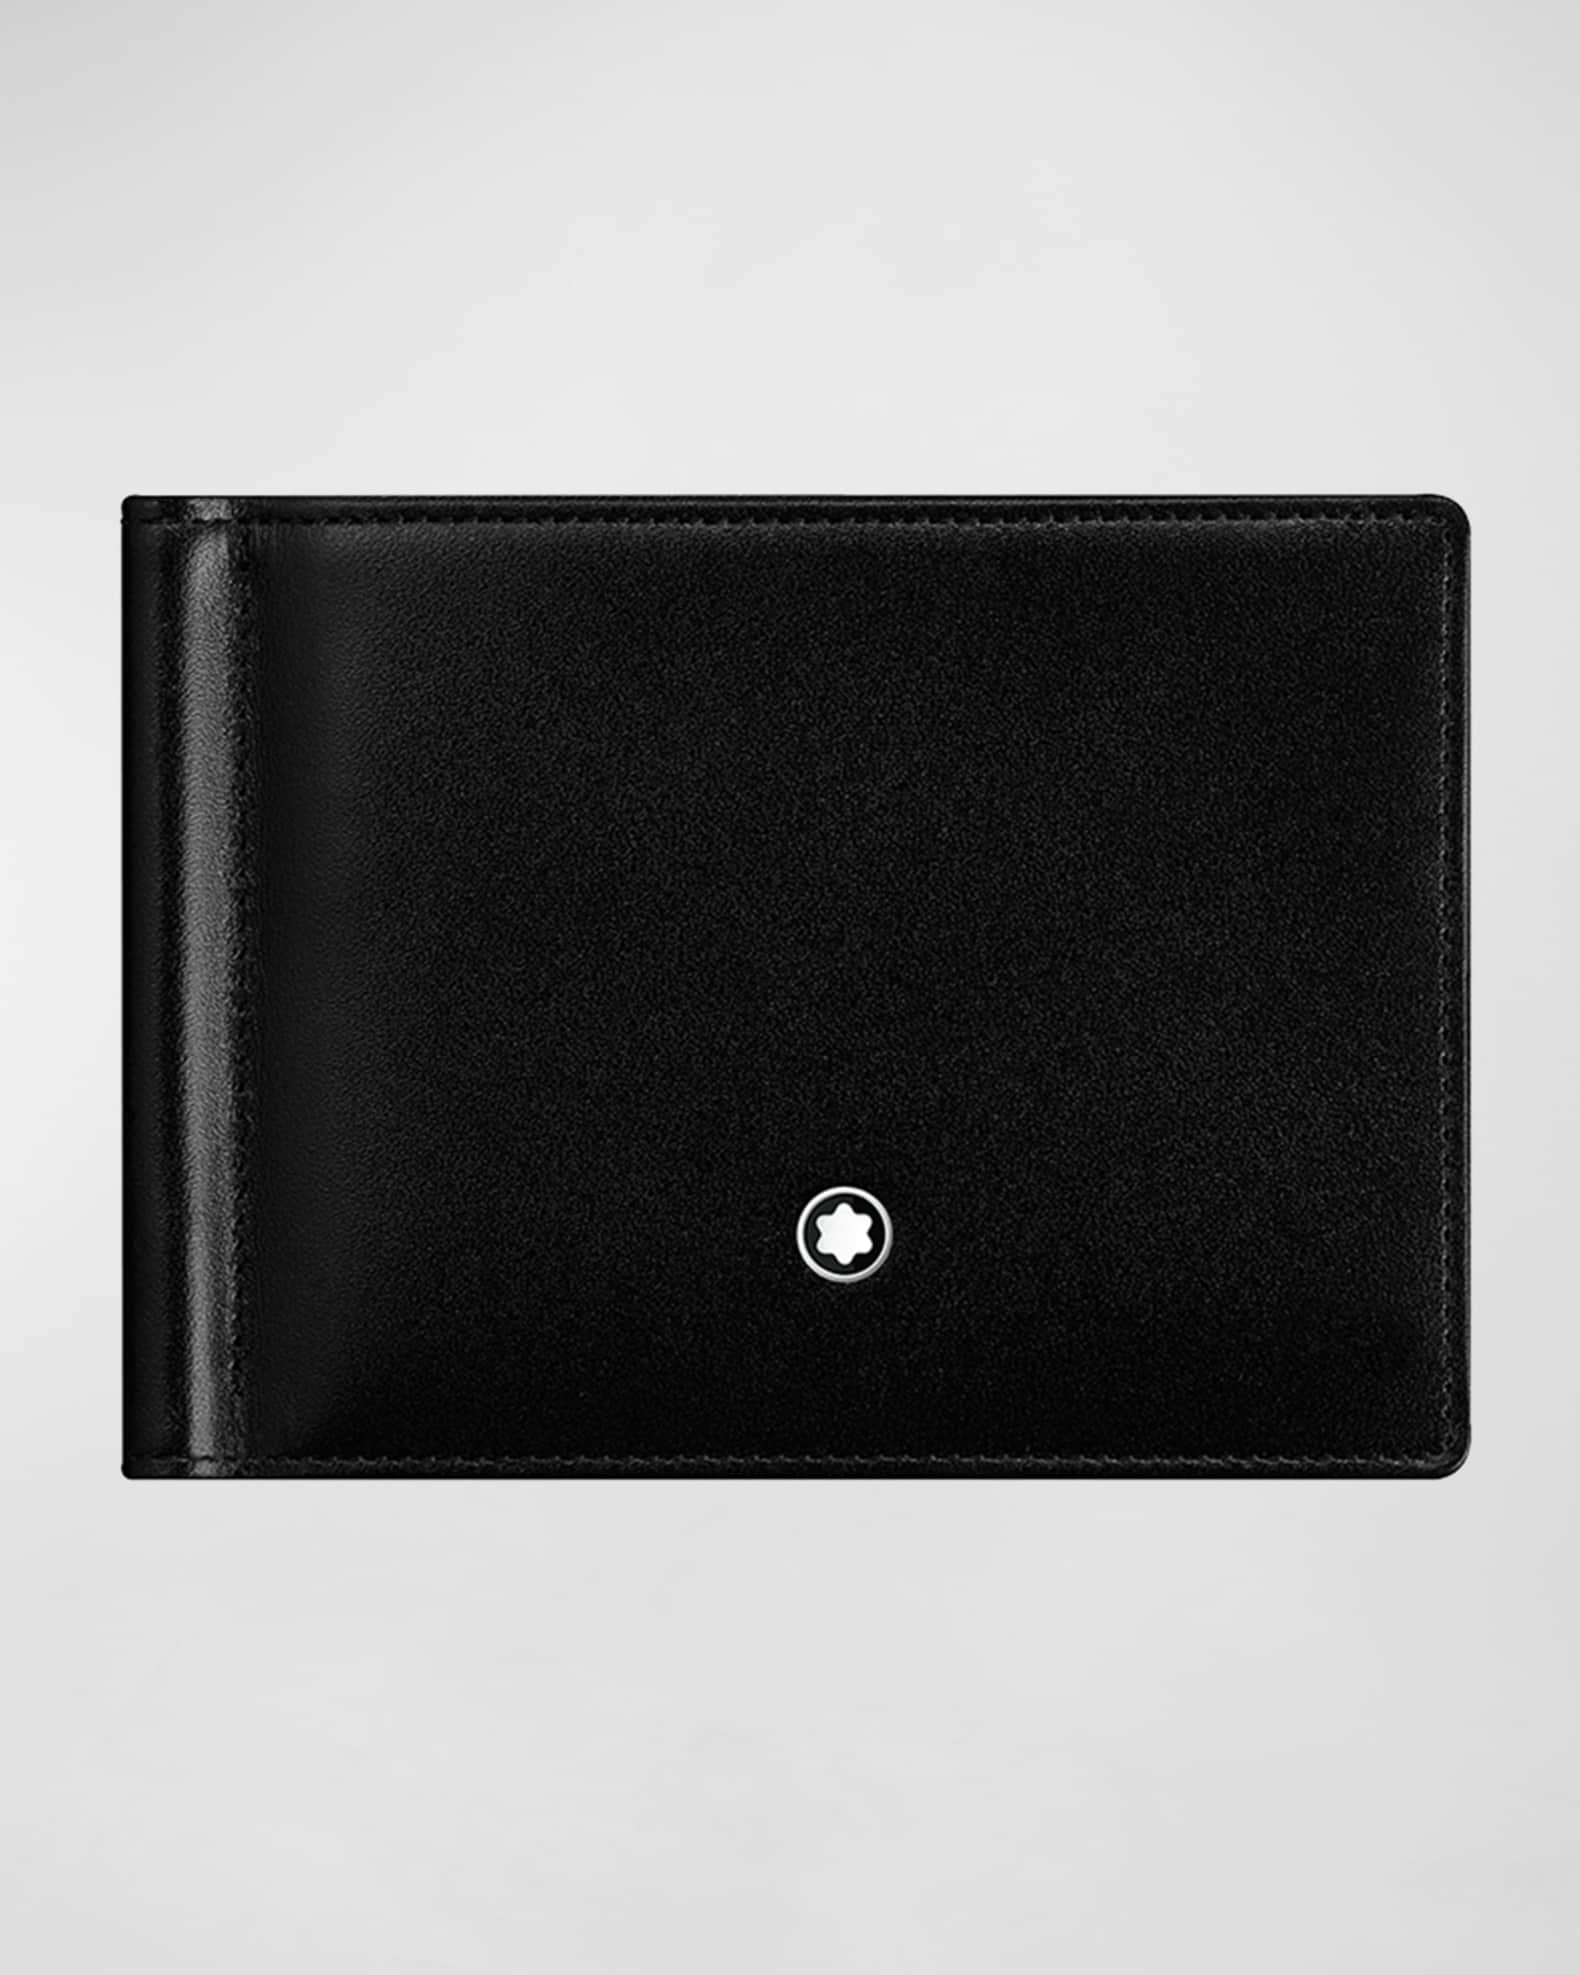 Montblanc Extreme 3.0 Leather Money Clip Wallet